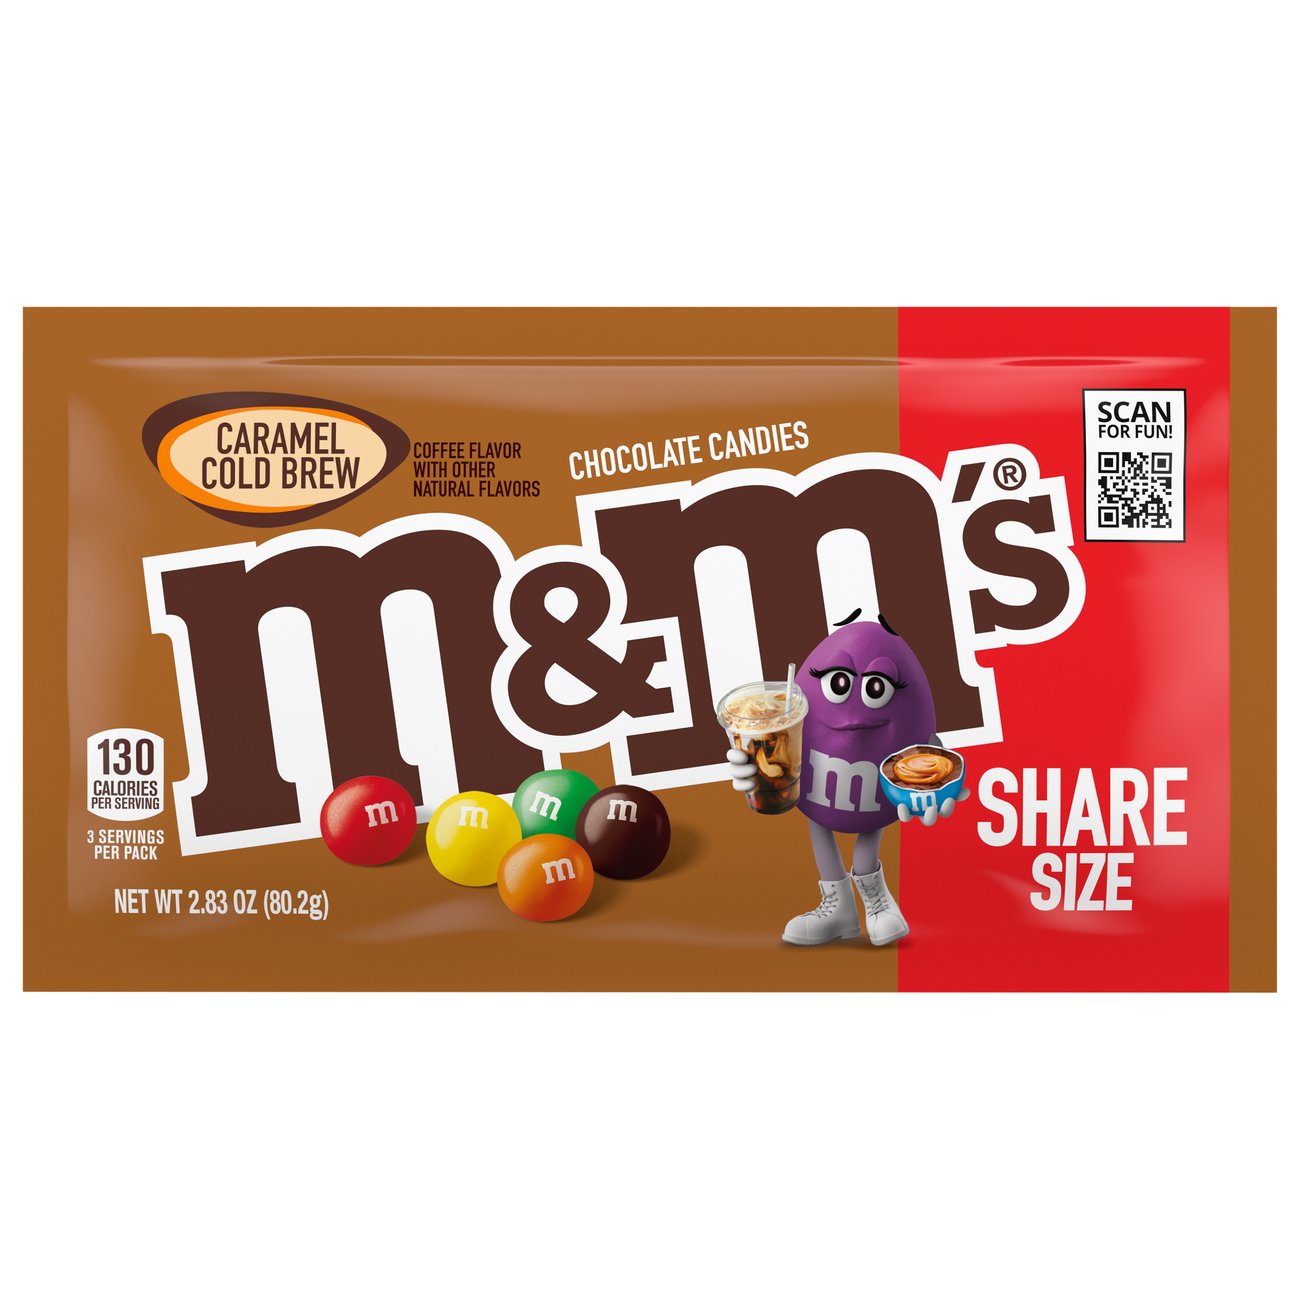 M&M's Chocolate Candies, Crunchy Cookie, Sharing Size